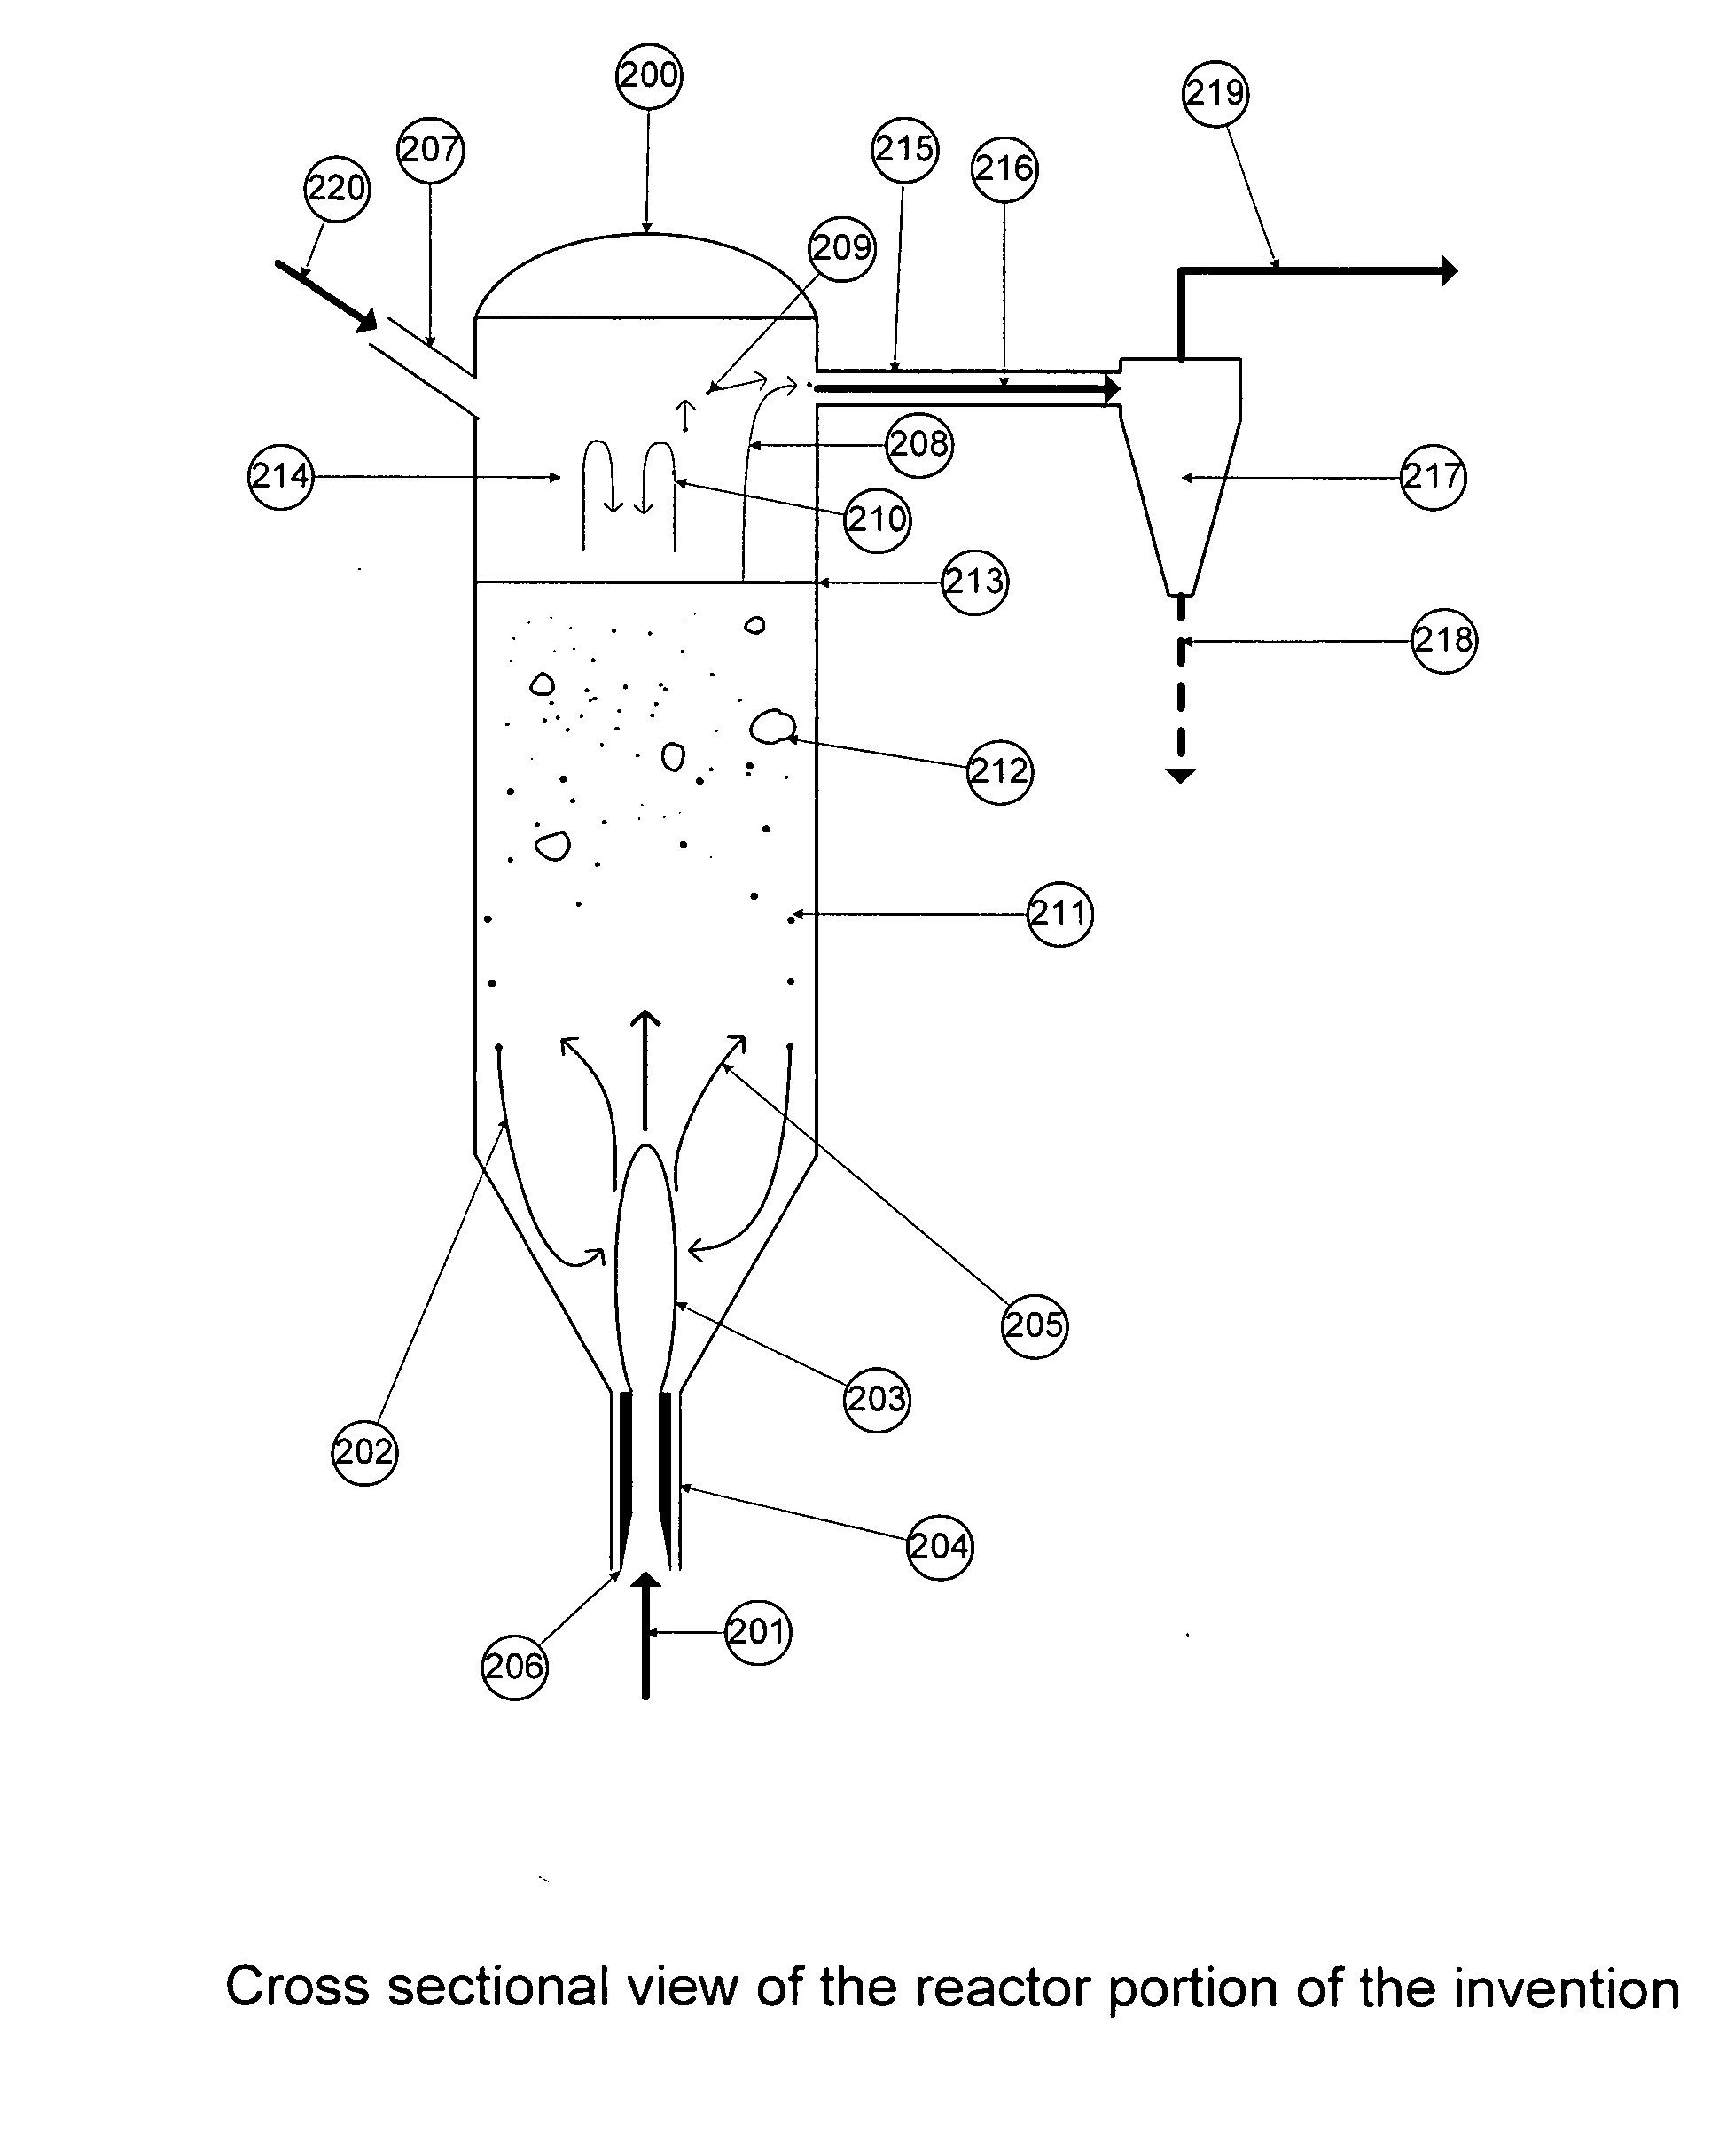 Apparatus and process for hydrogenation of a silicon tetrahalide and silicon to the trihalosilane